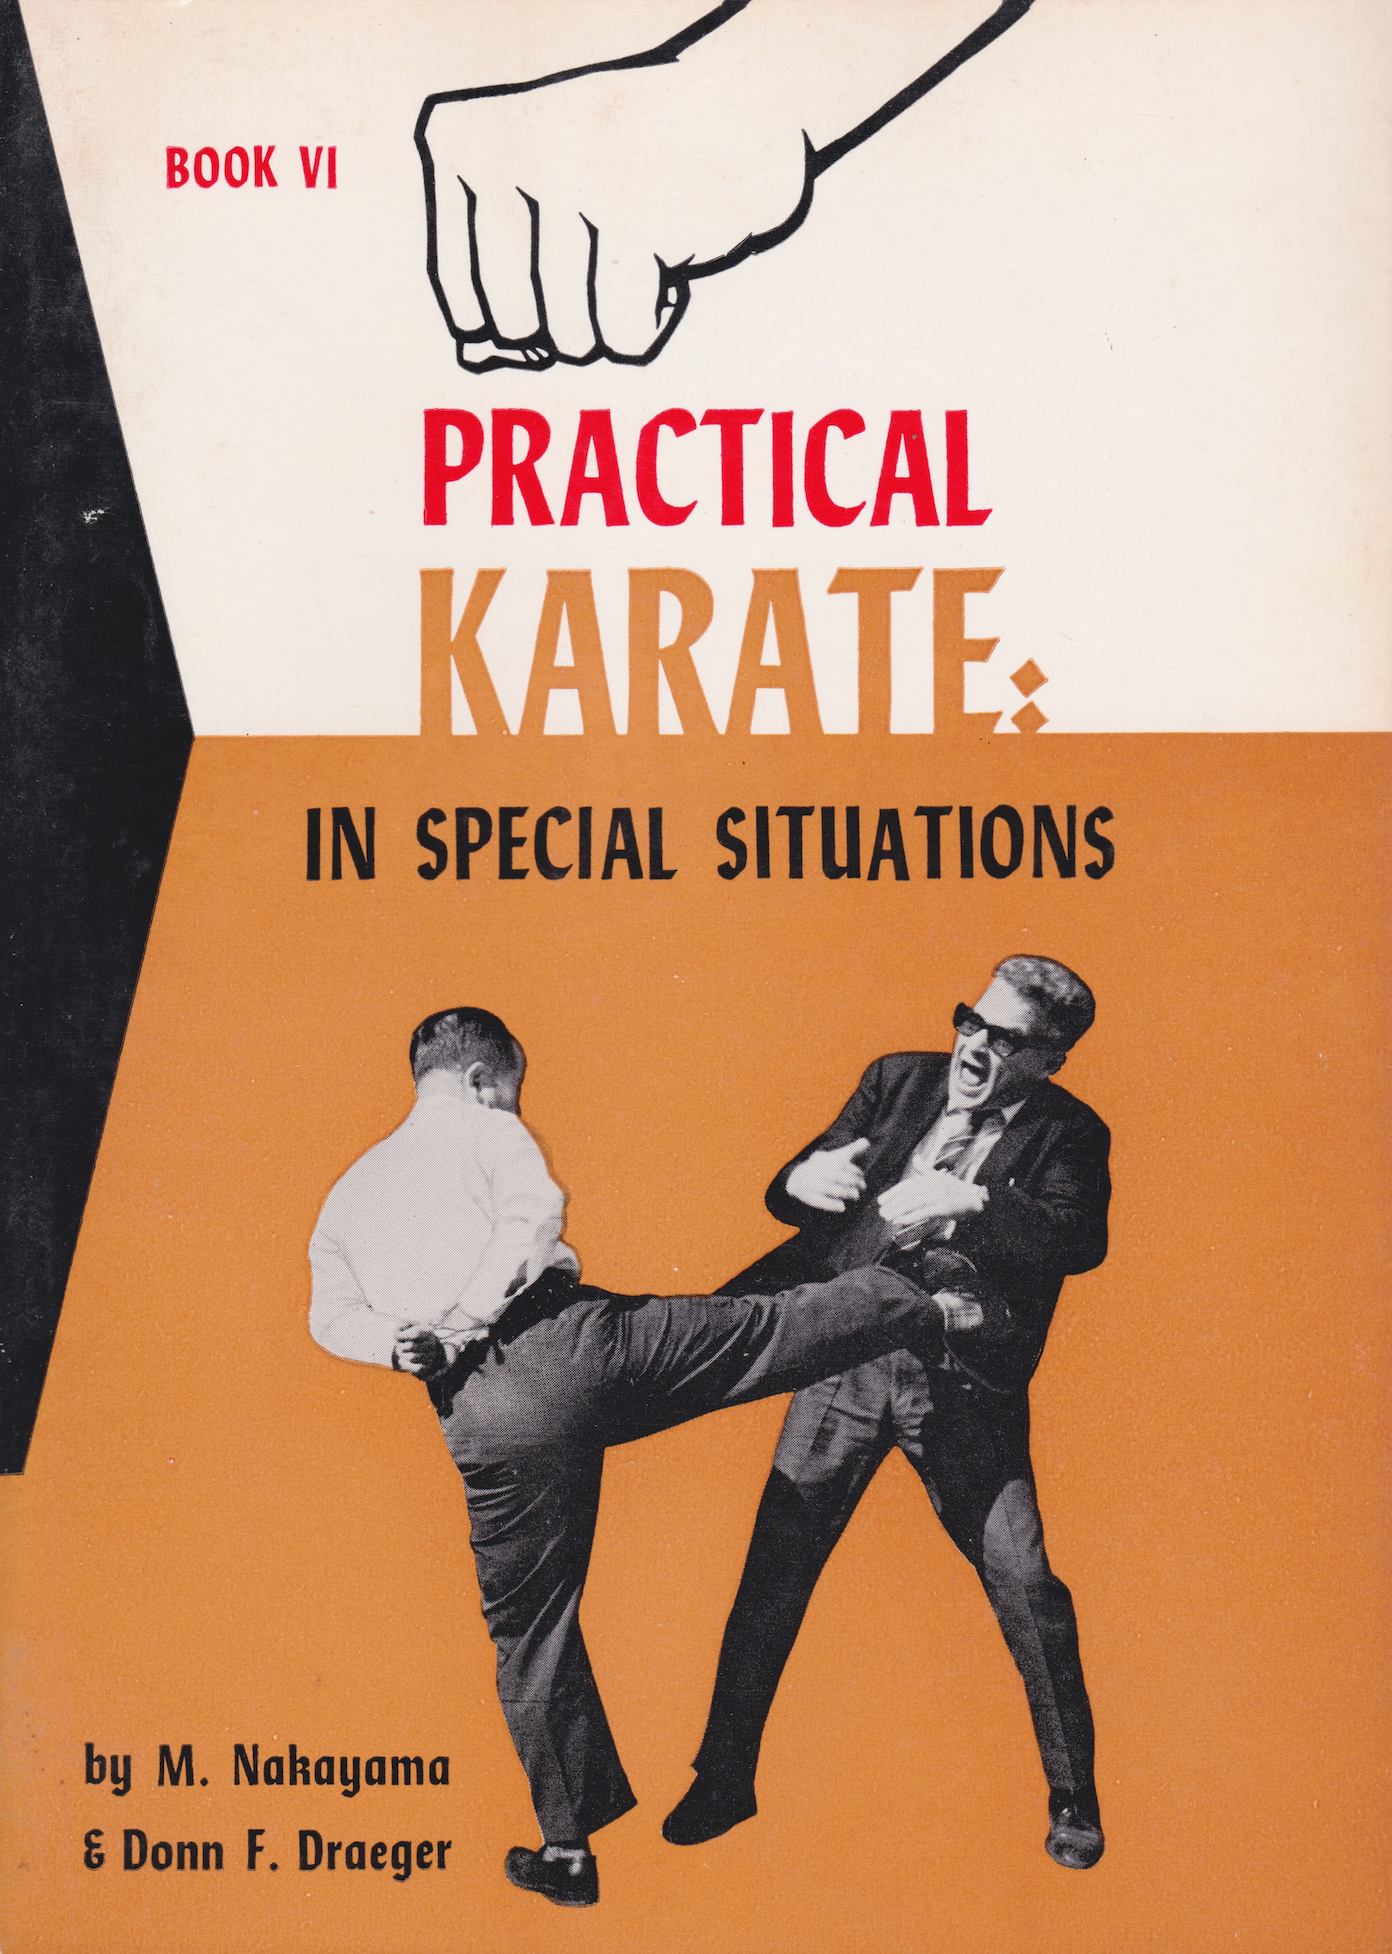 Practical Karate Book 6: In Special Situations by Masatoshi Nakayama & Donn Draeger (Preowned)